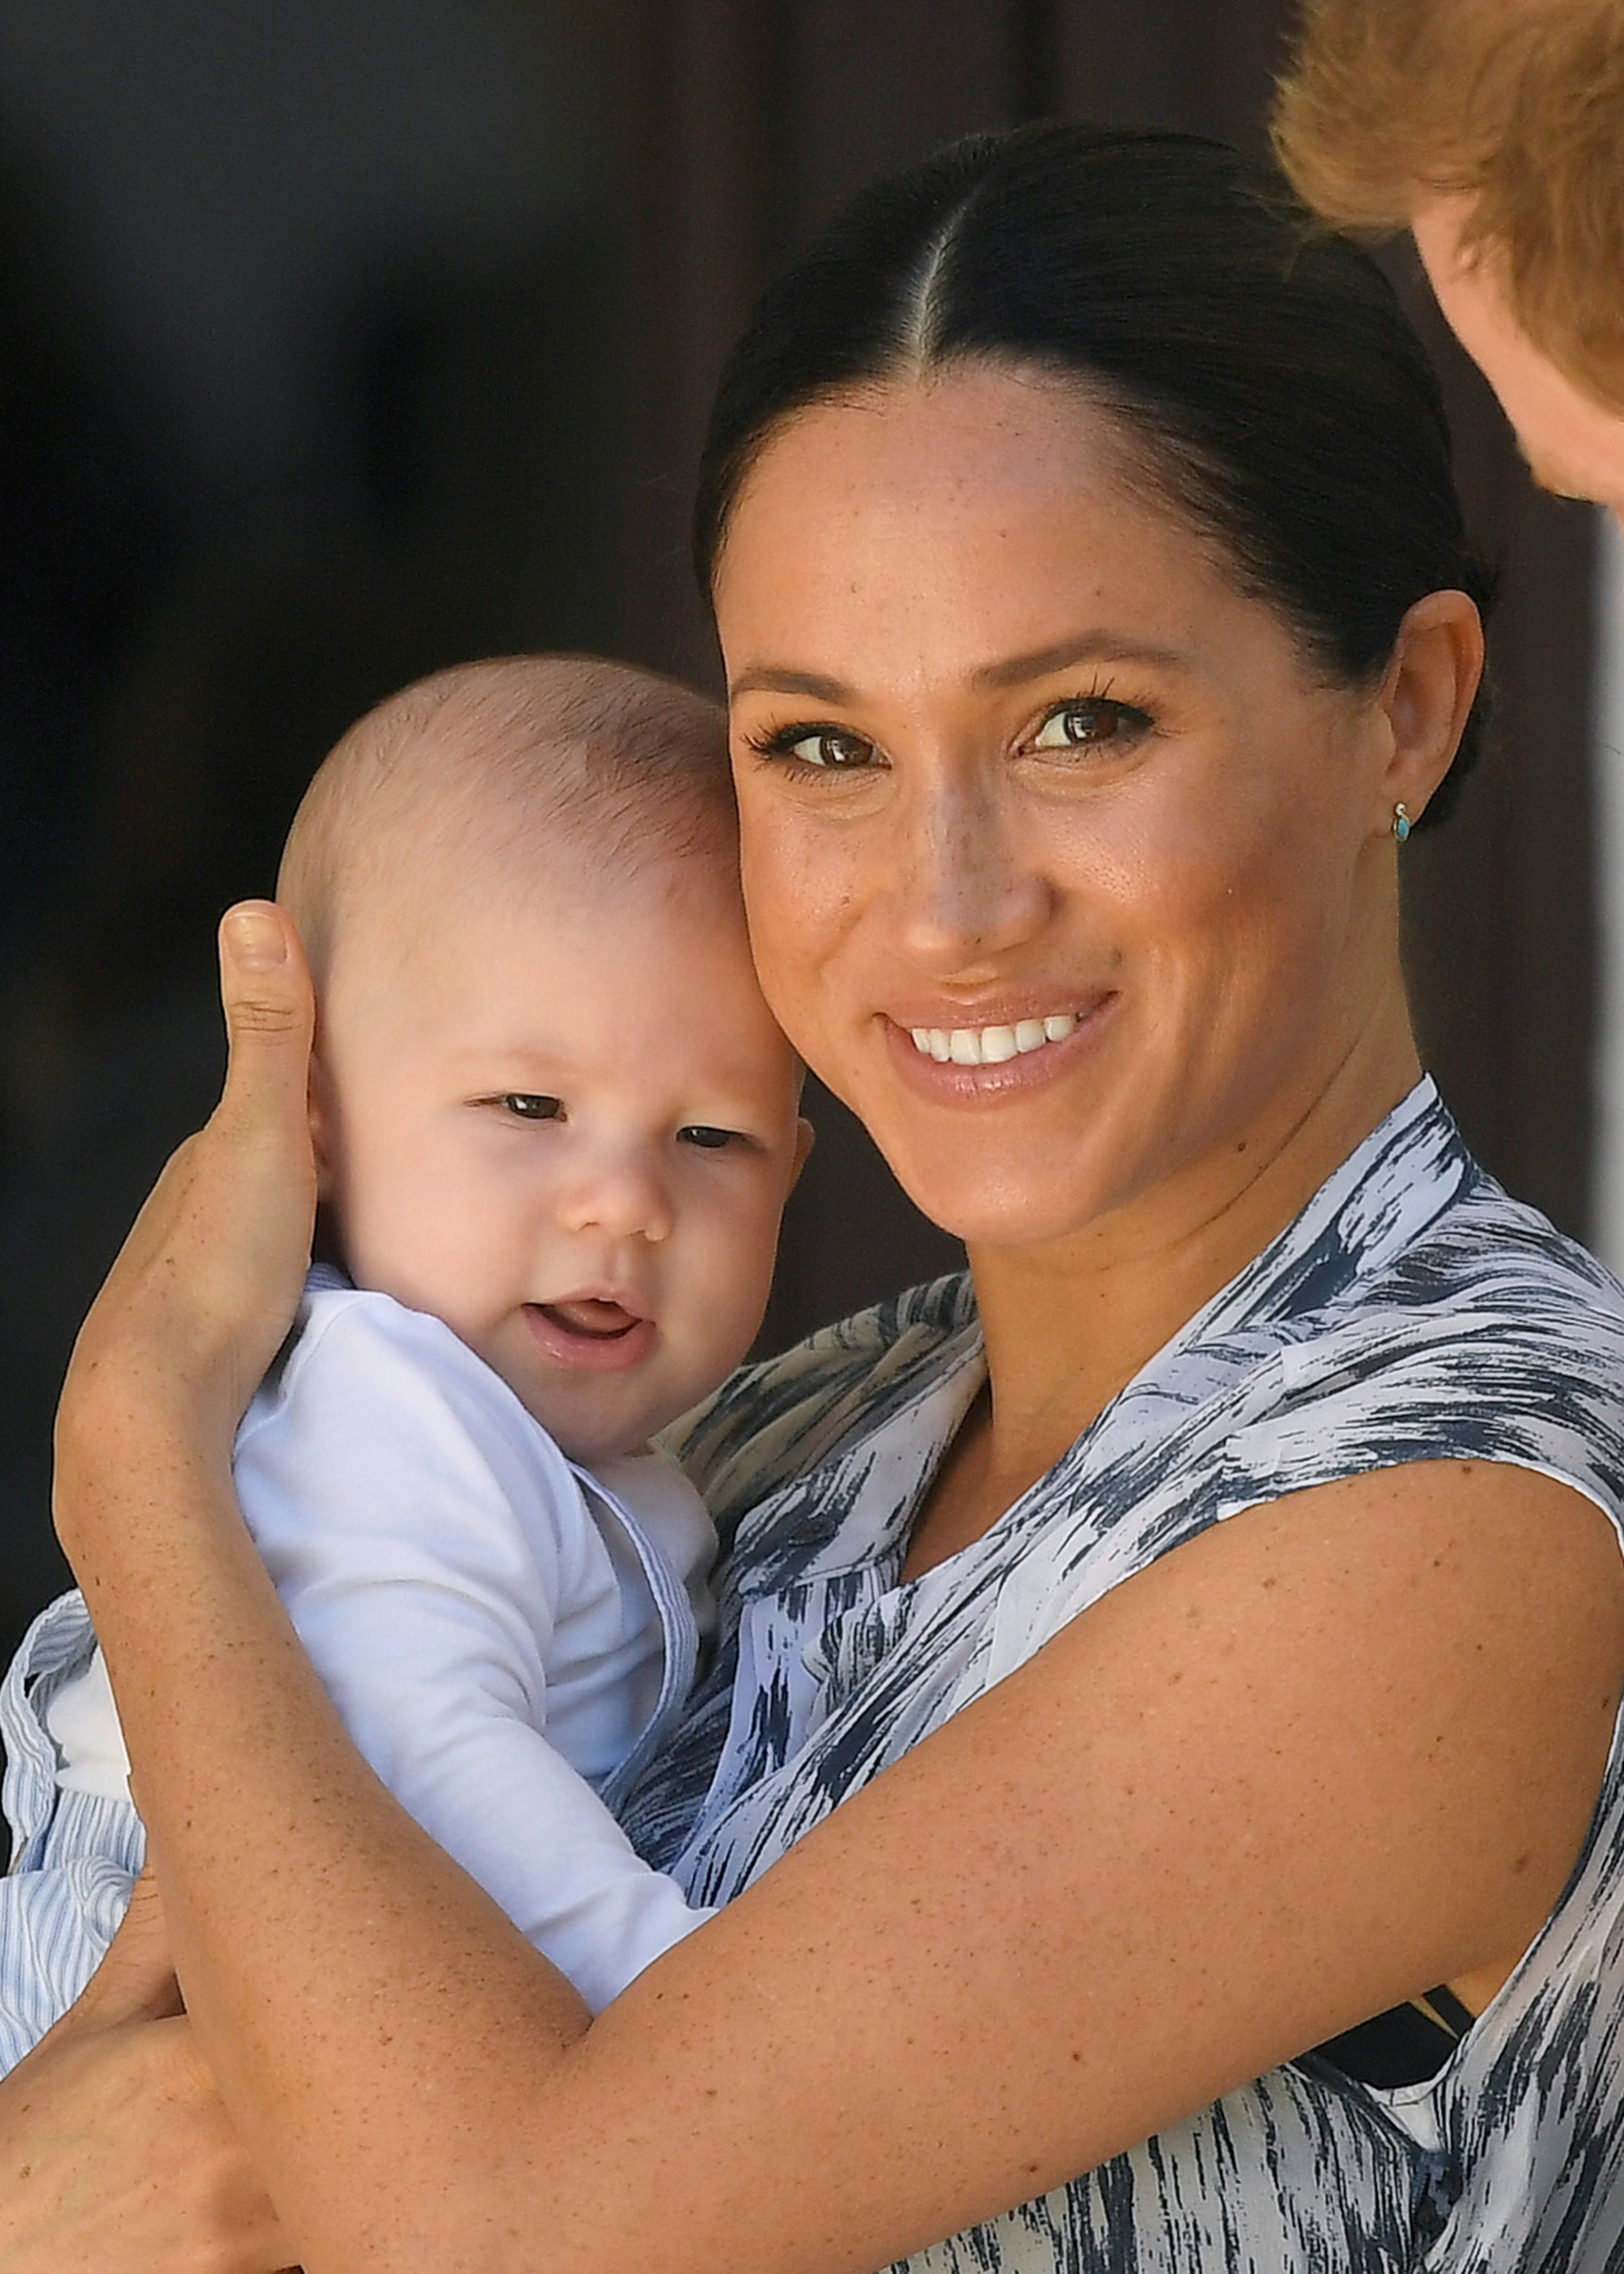 Meghan Markle poses with her son Archie, then a baby.